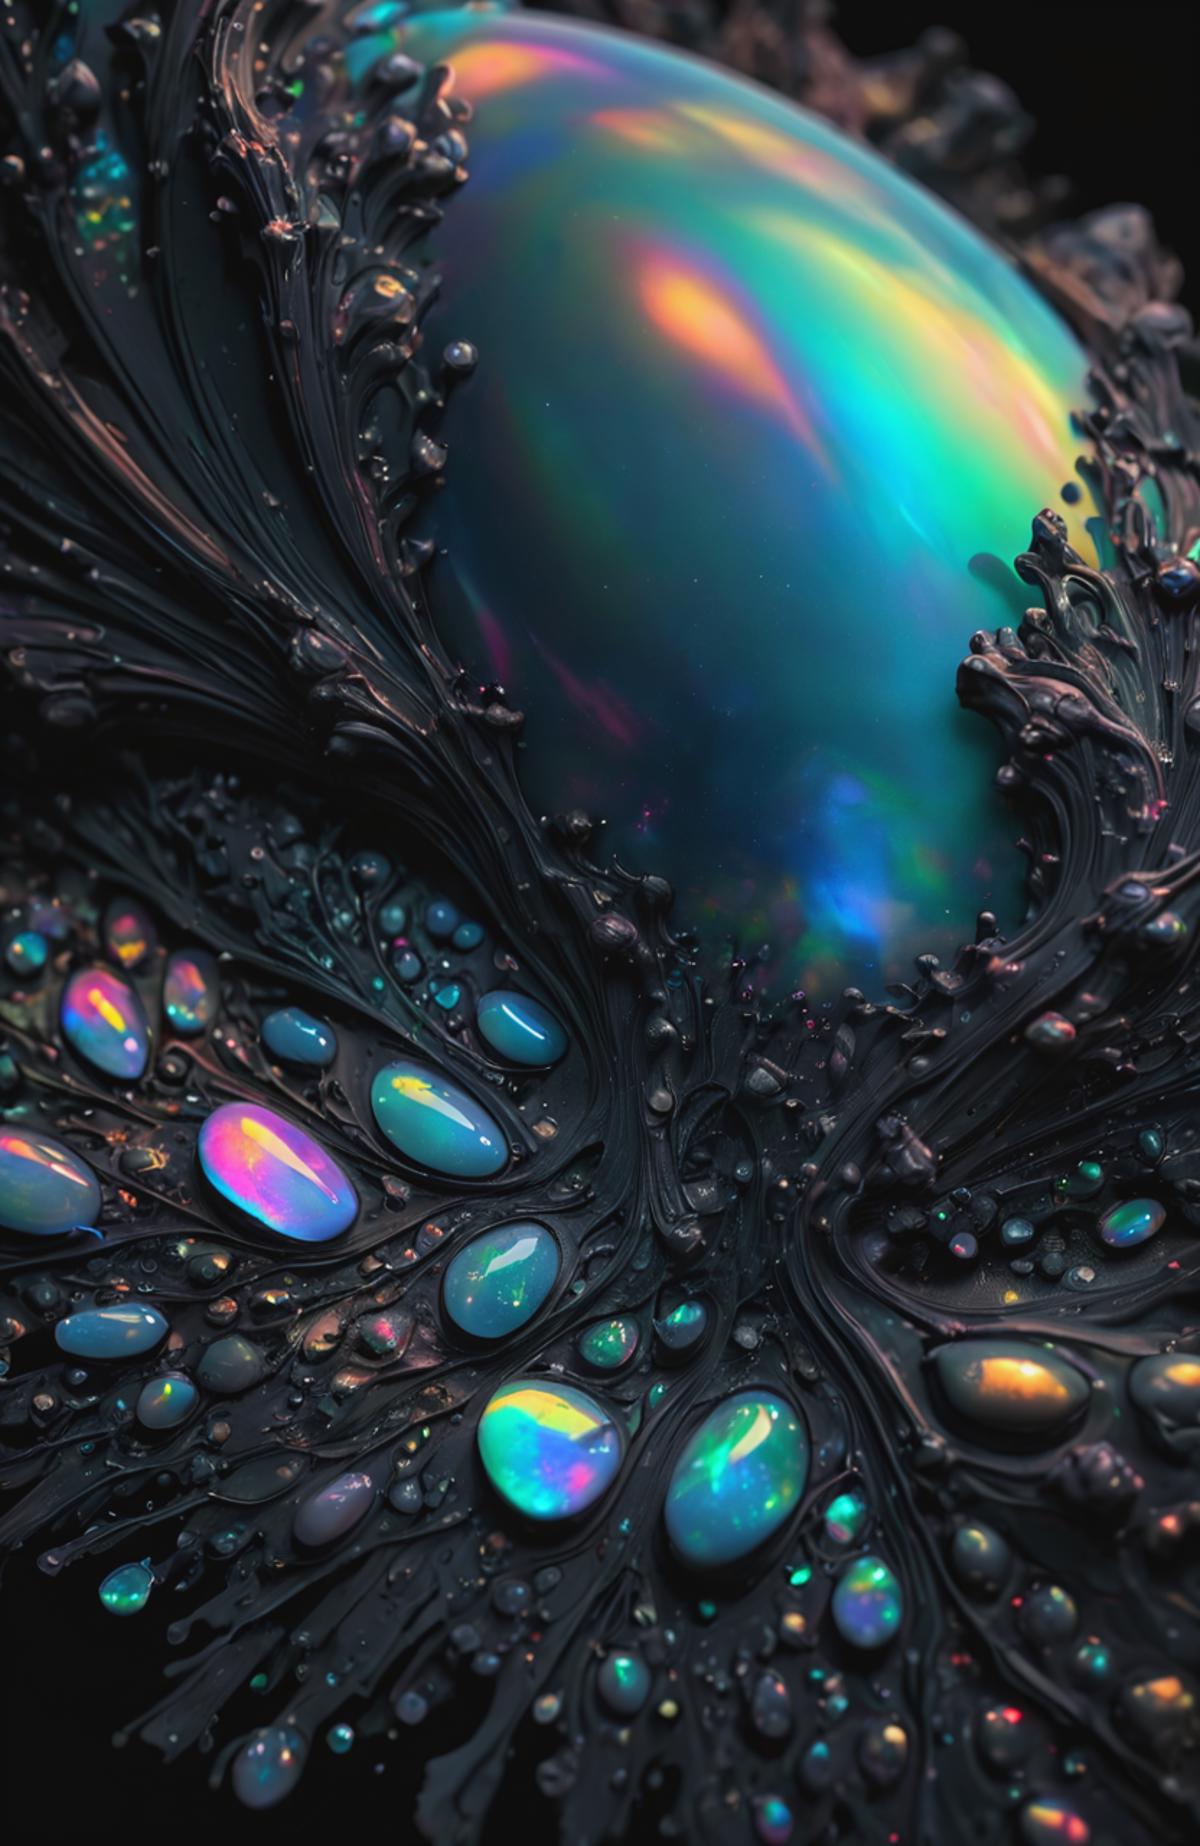 Colorful Swirling Rainbow Droplets of Water on a Black Background